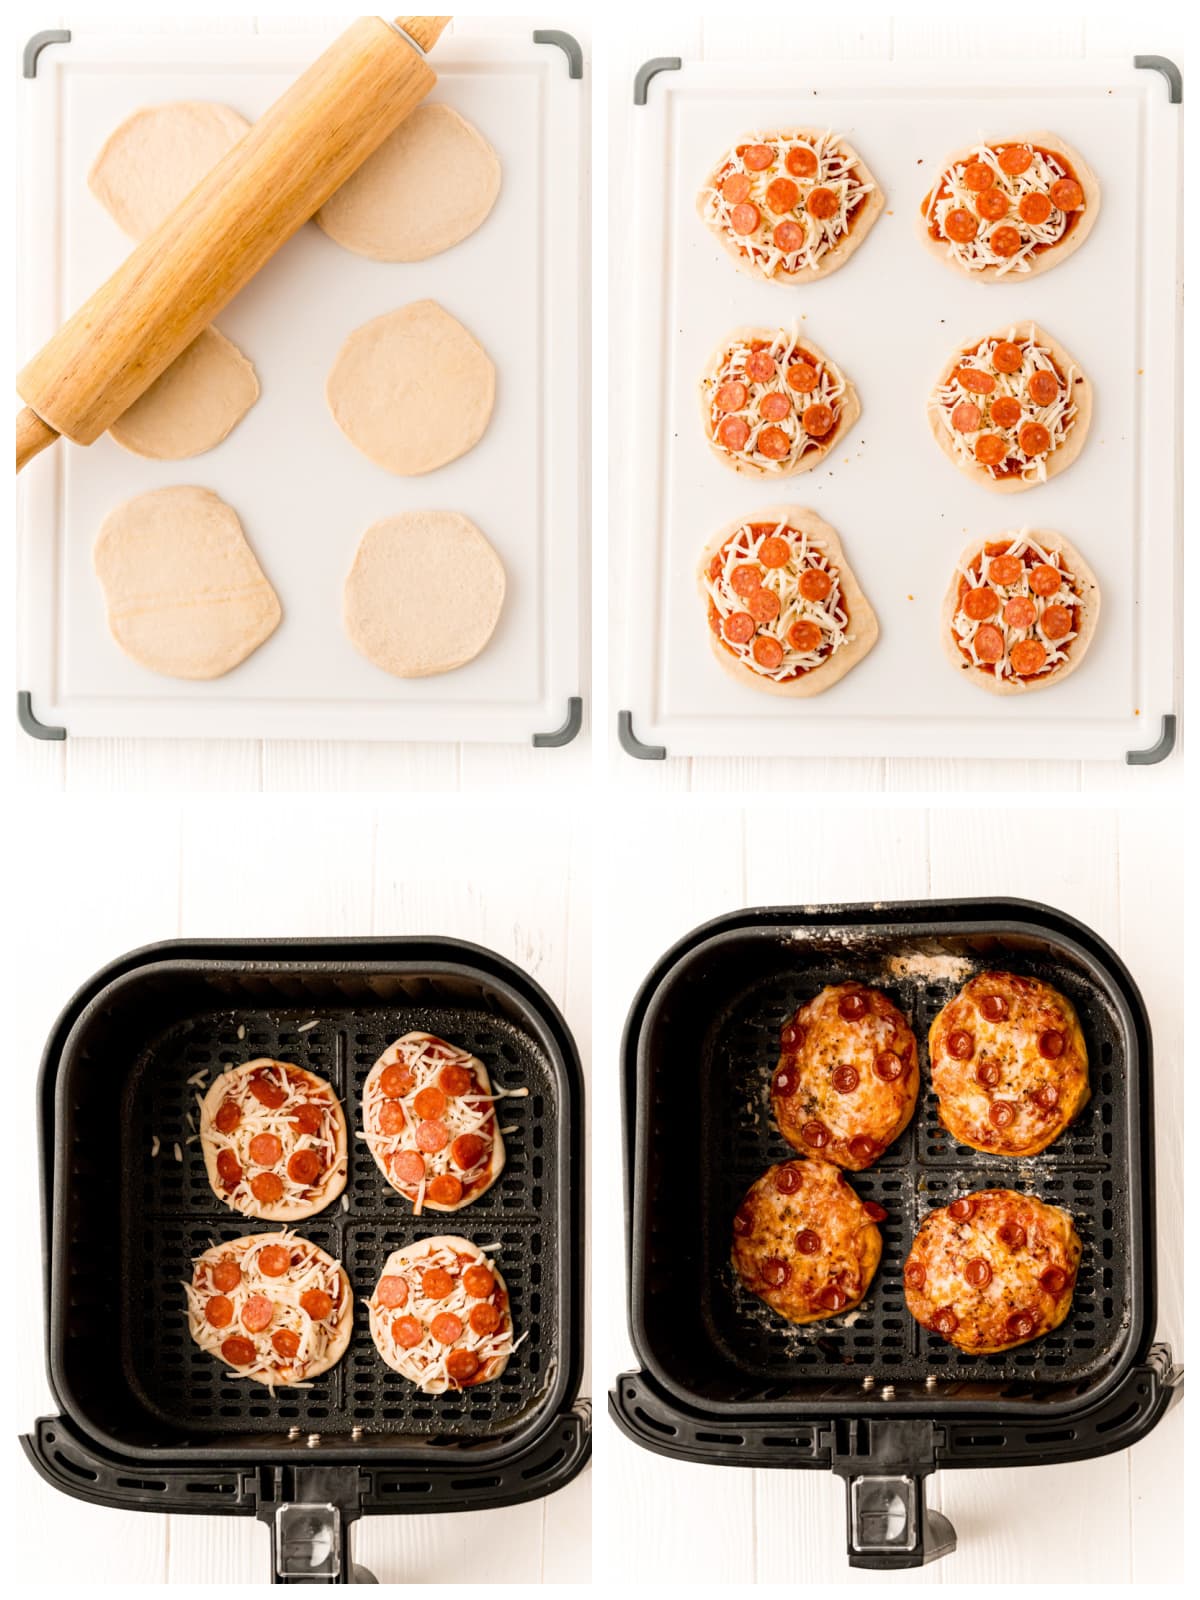 Step by step photos on how to make a Mini Air Fryer Pizza.